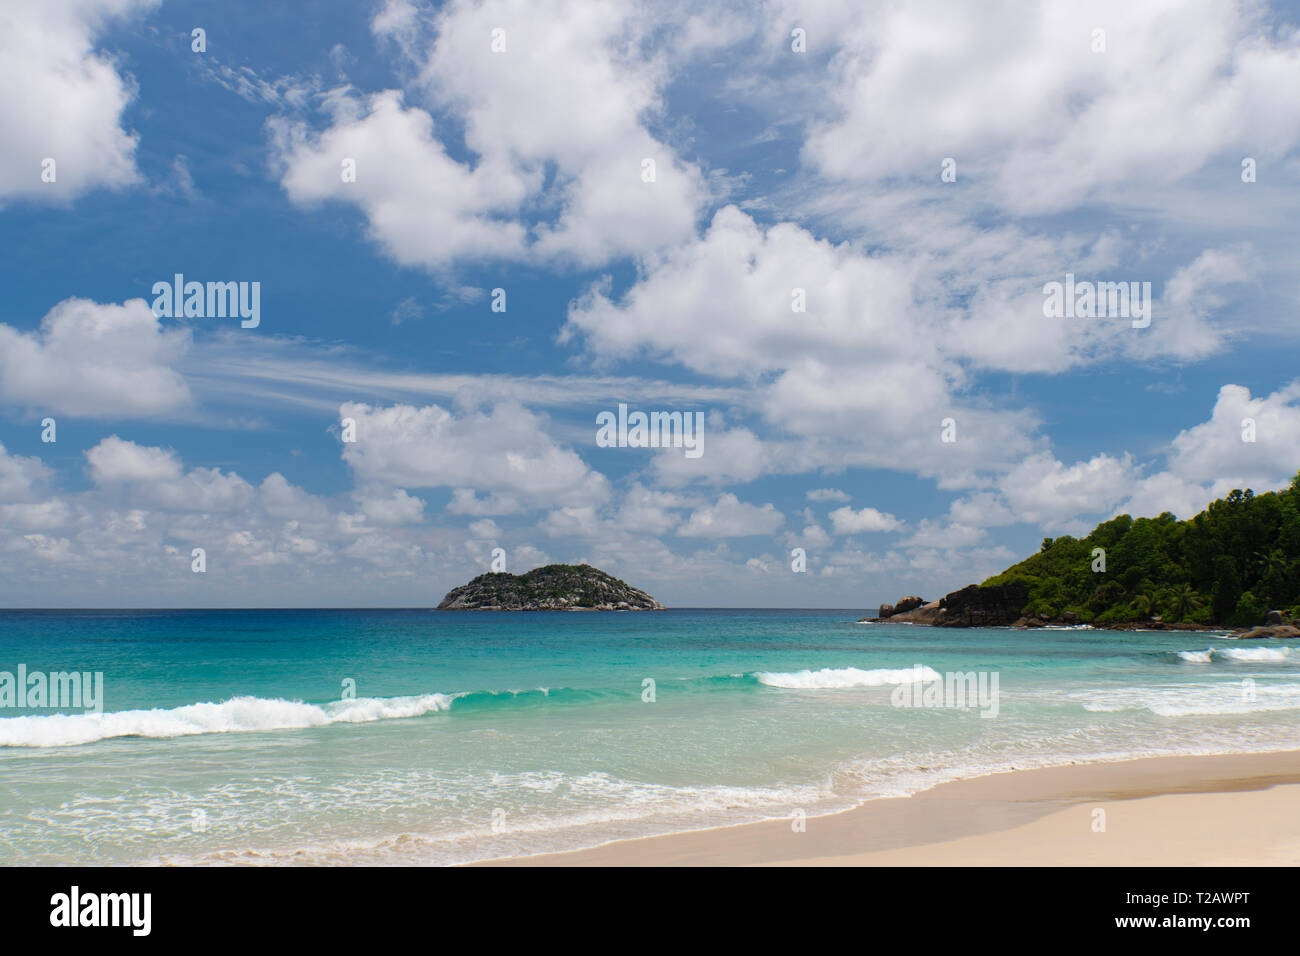 A view toward Il aux Vaches from Grand Anse on the West coast of Mahe, the Seychelles Stock Photo